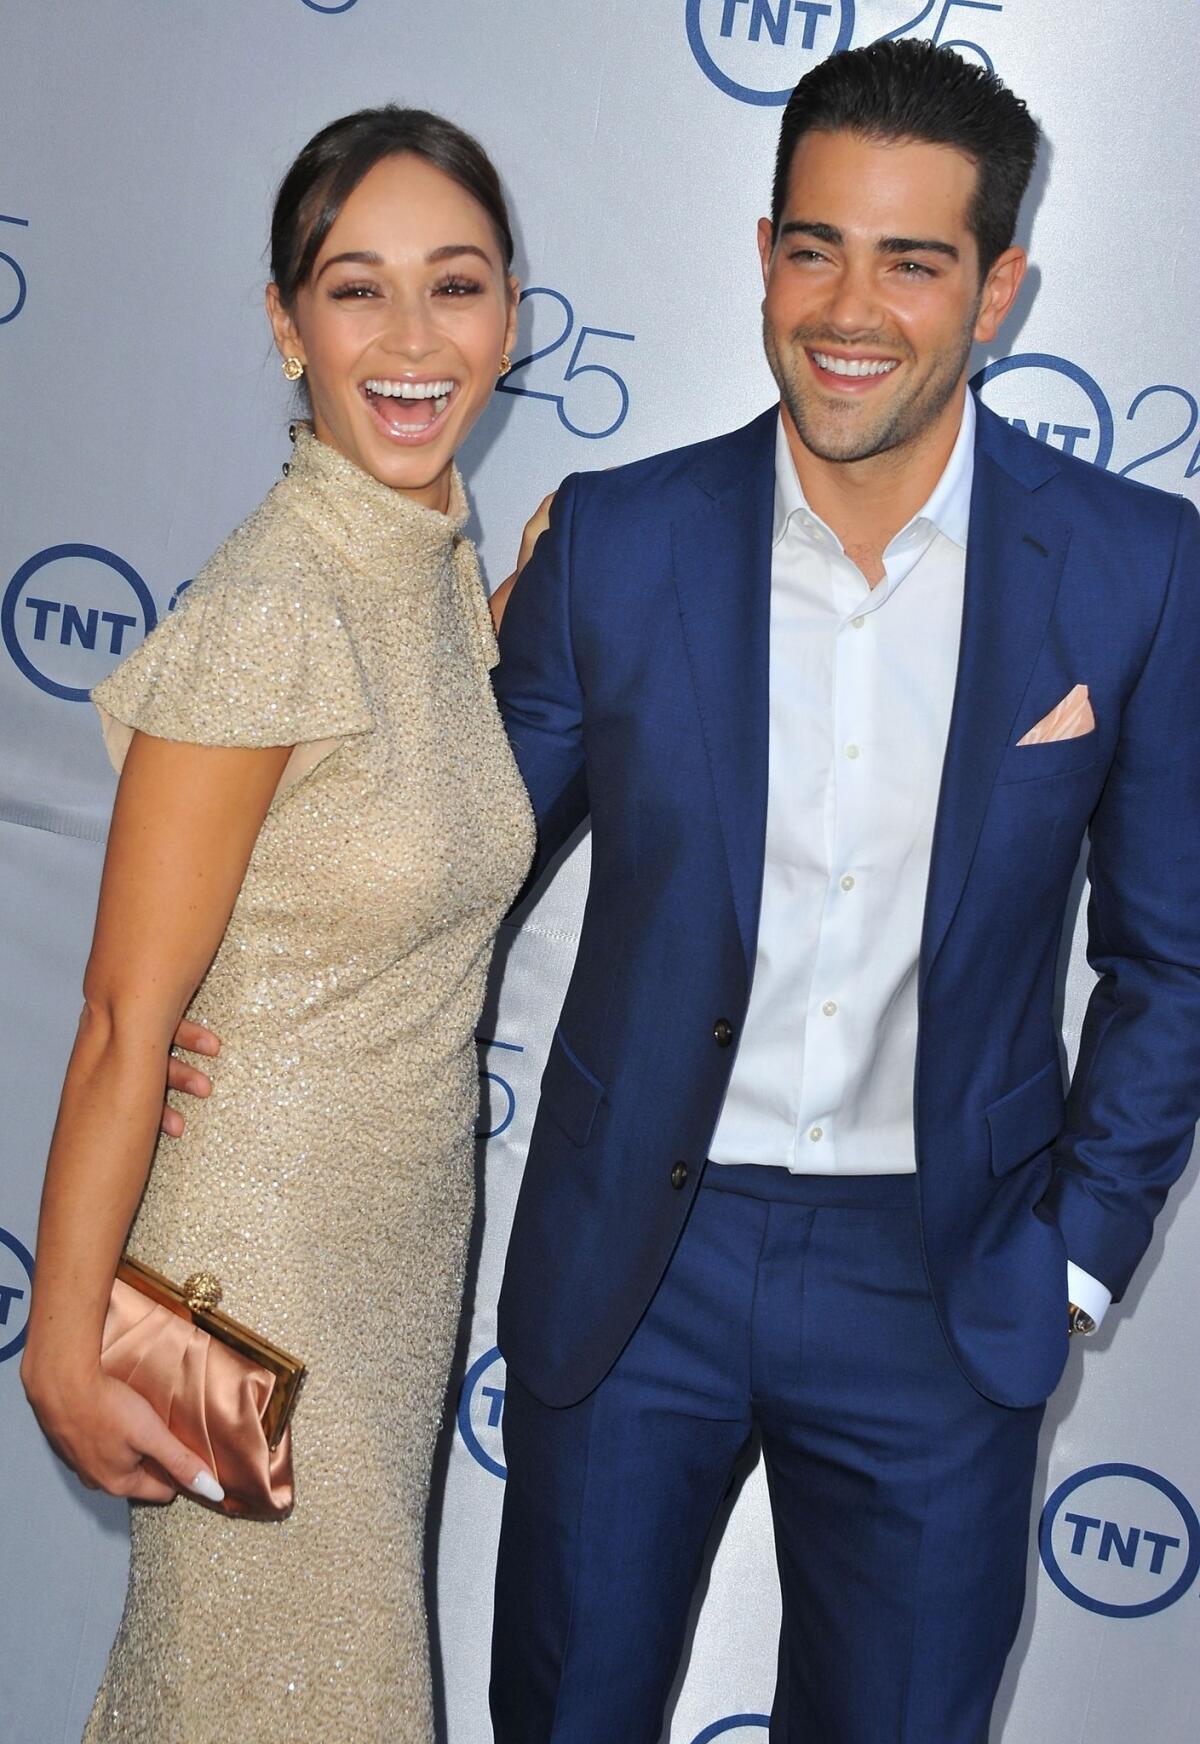 Cara Santana and Jesse Metcalfe at TNT's 25th anniversary party in Beverly Hills in July.